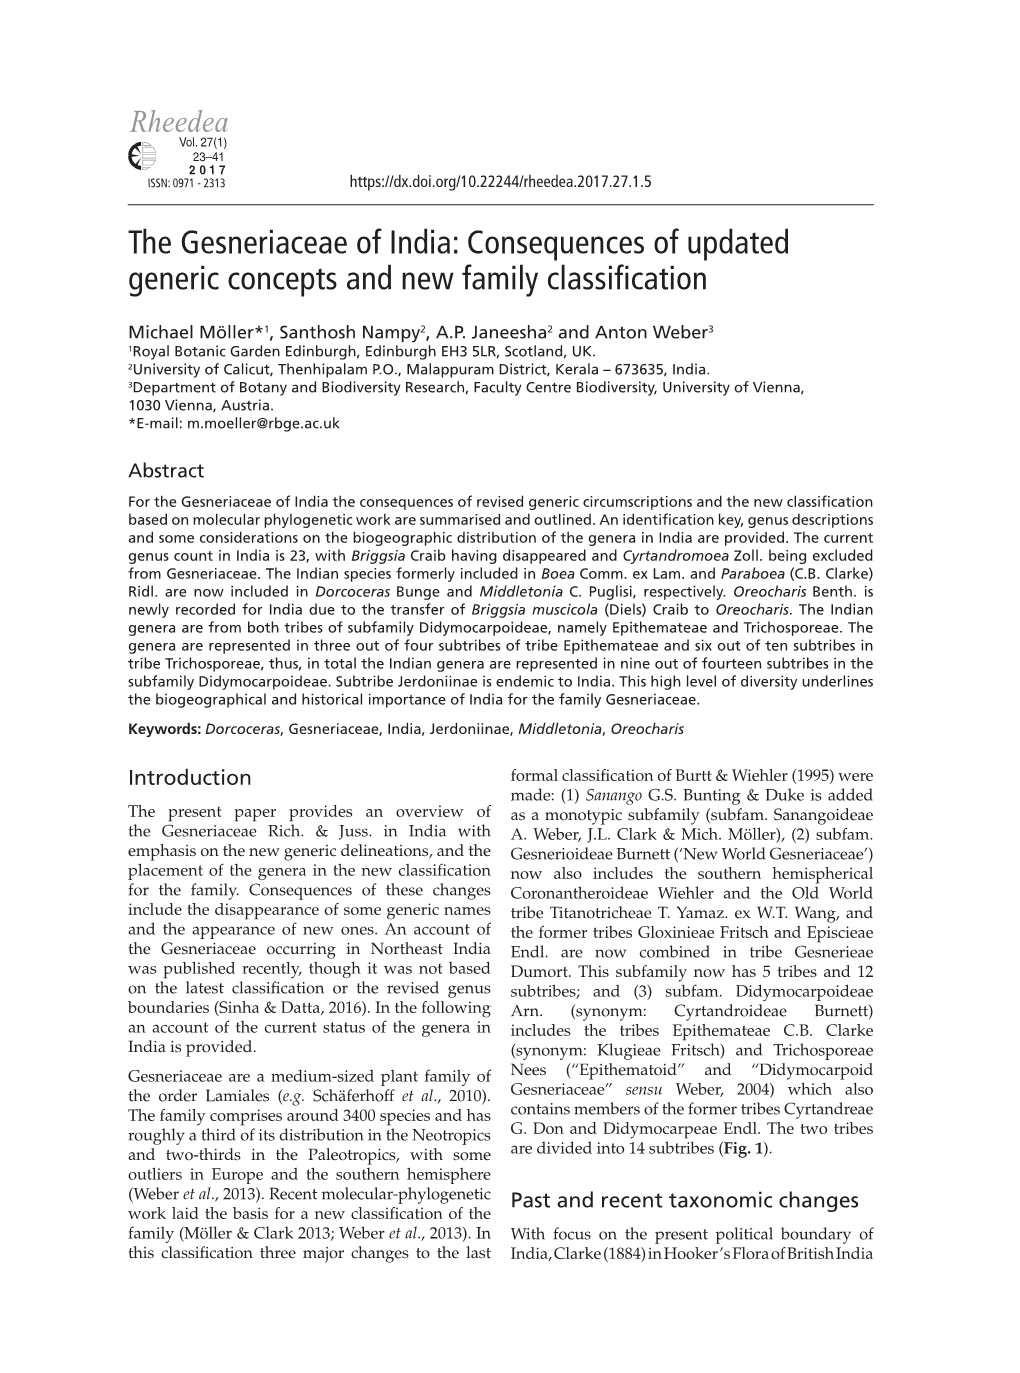 The Gesneriaceae of India: Consequences of Updated Generic Concepts and New Family Classification